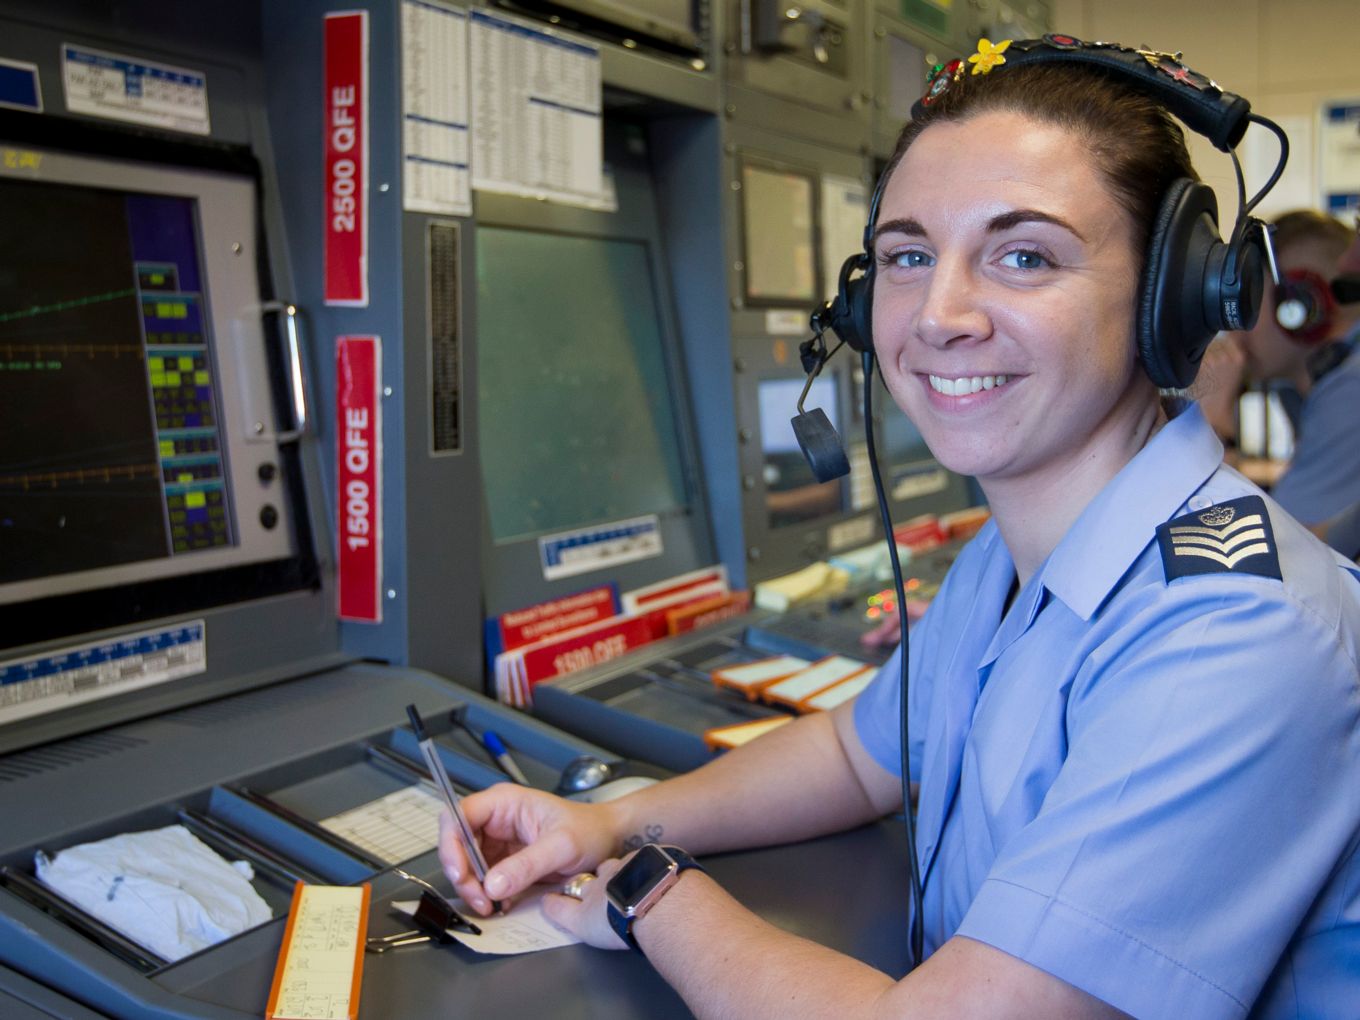 Flight Sergeant Katie Mason in the control room at RAF Wittering